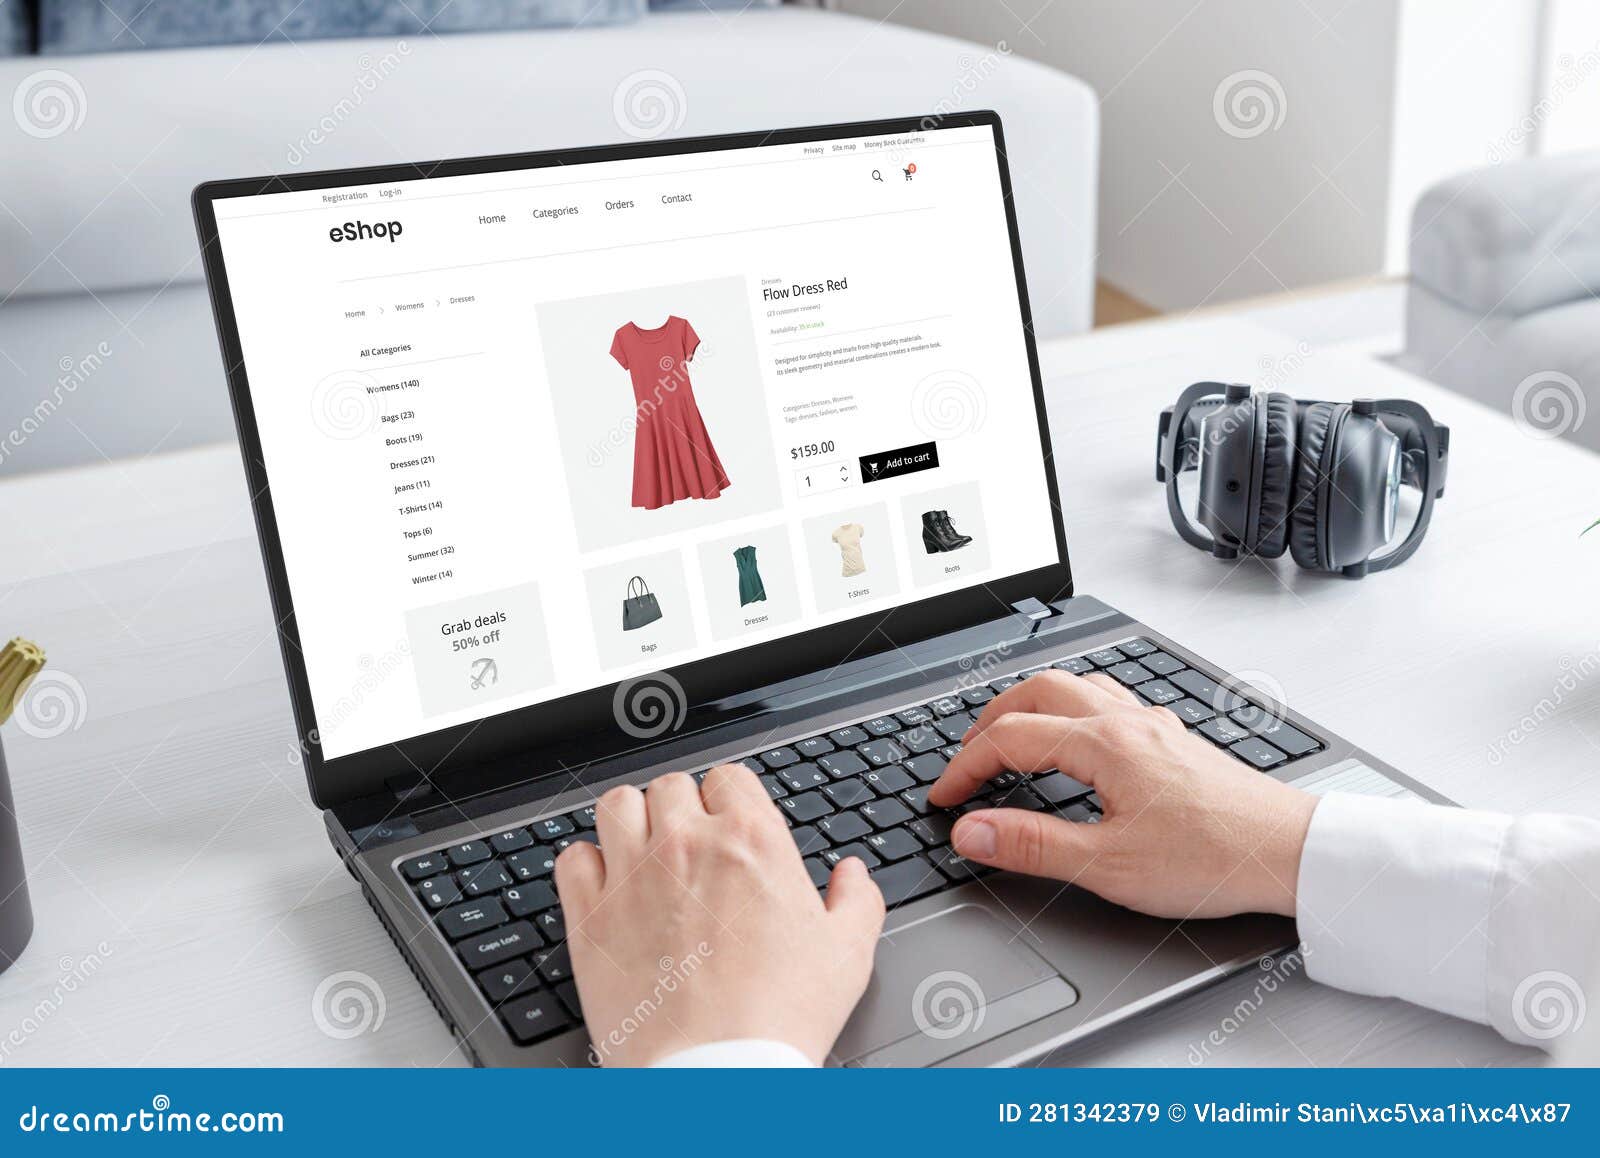 woman purchasing a stunning red dress online with laptop computer